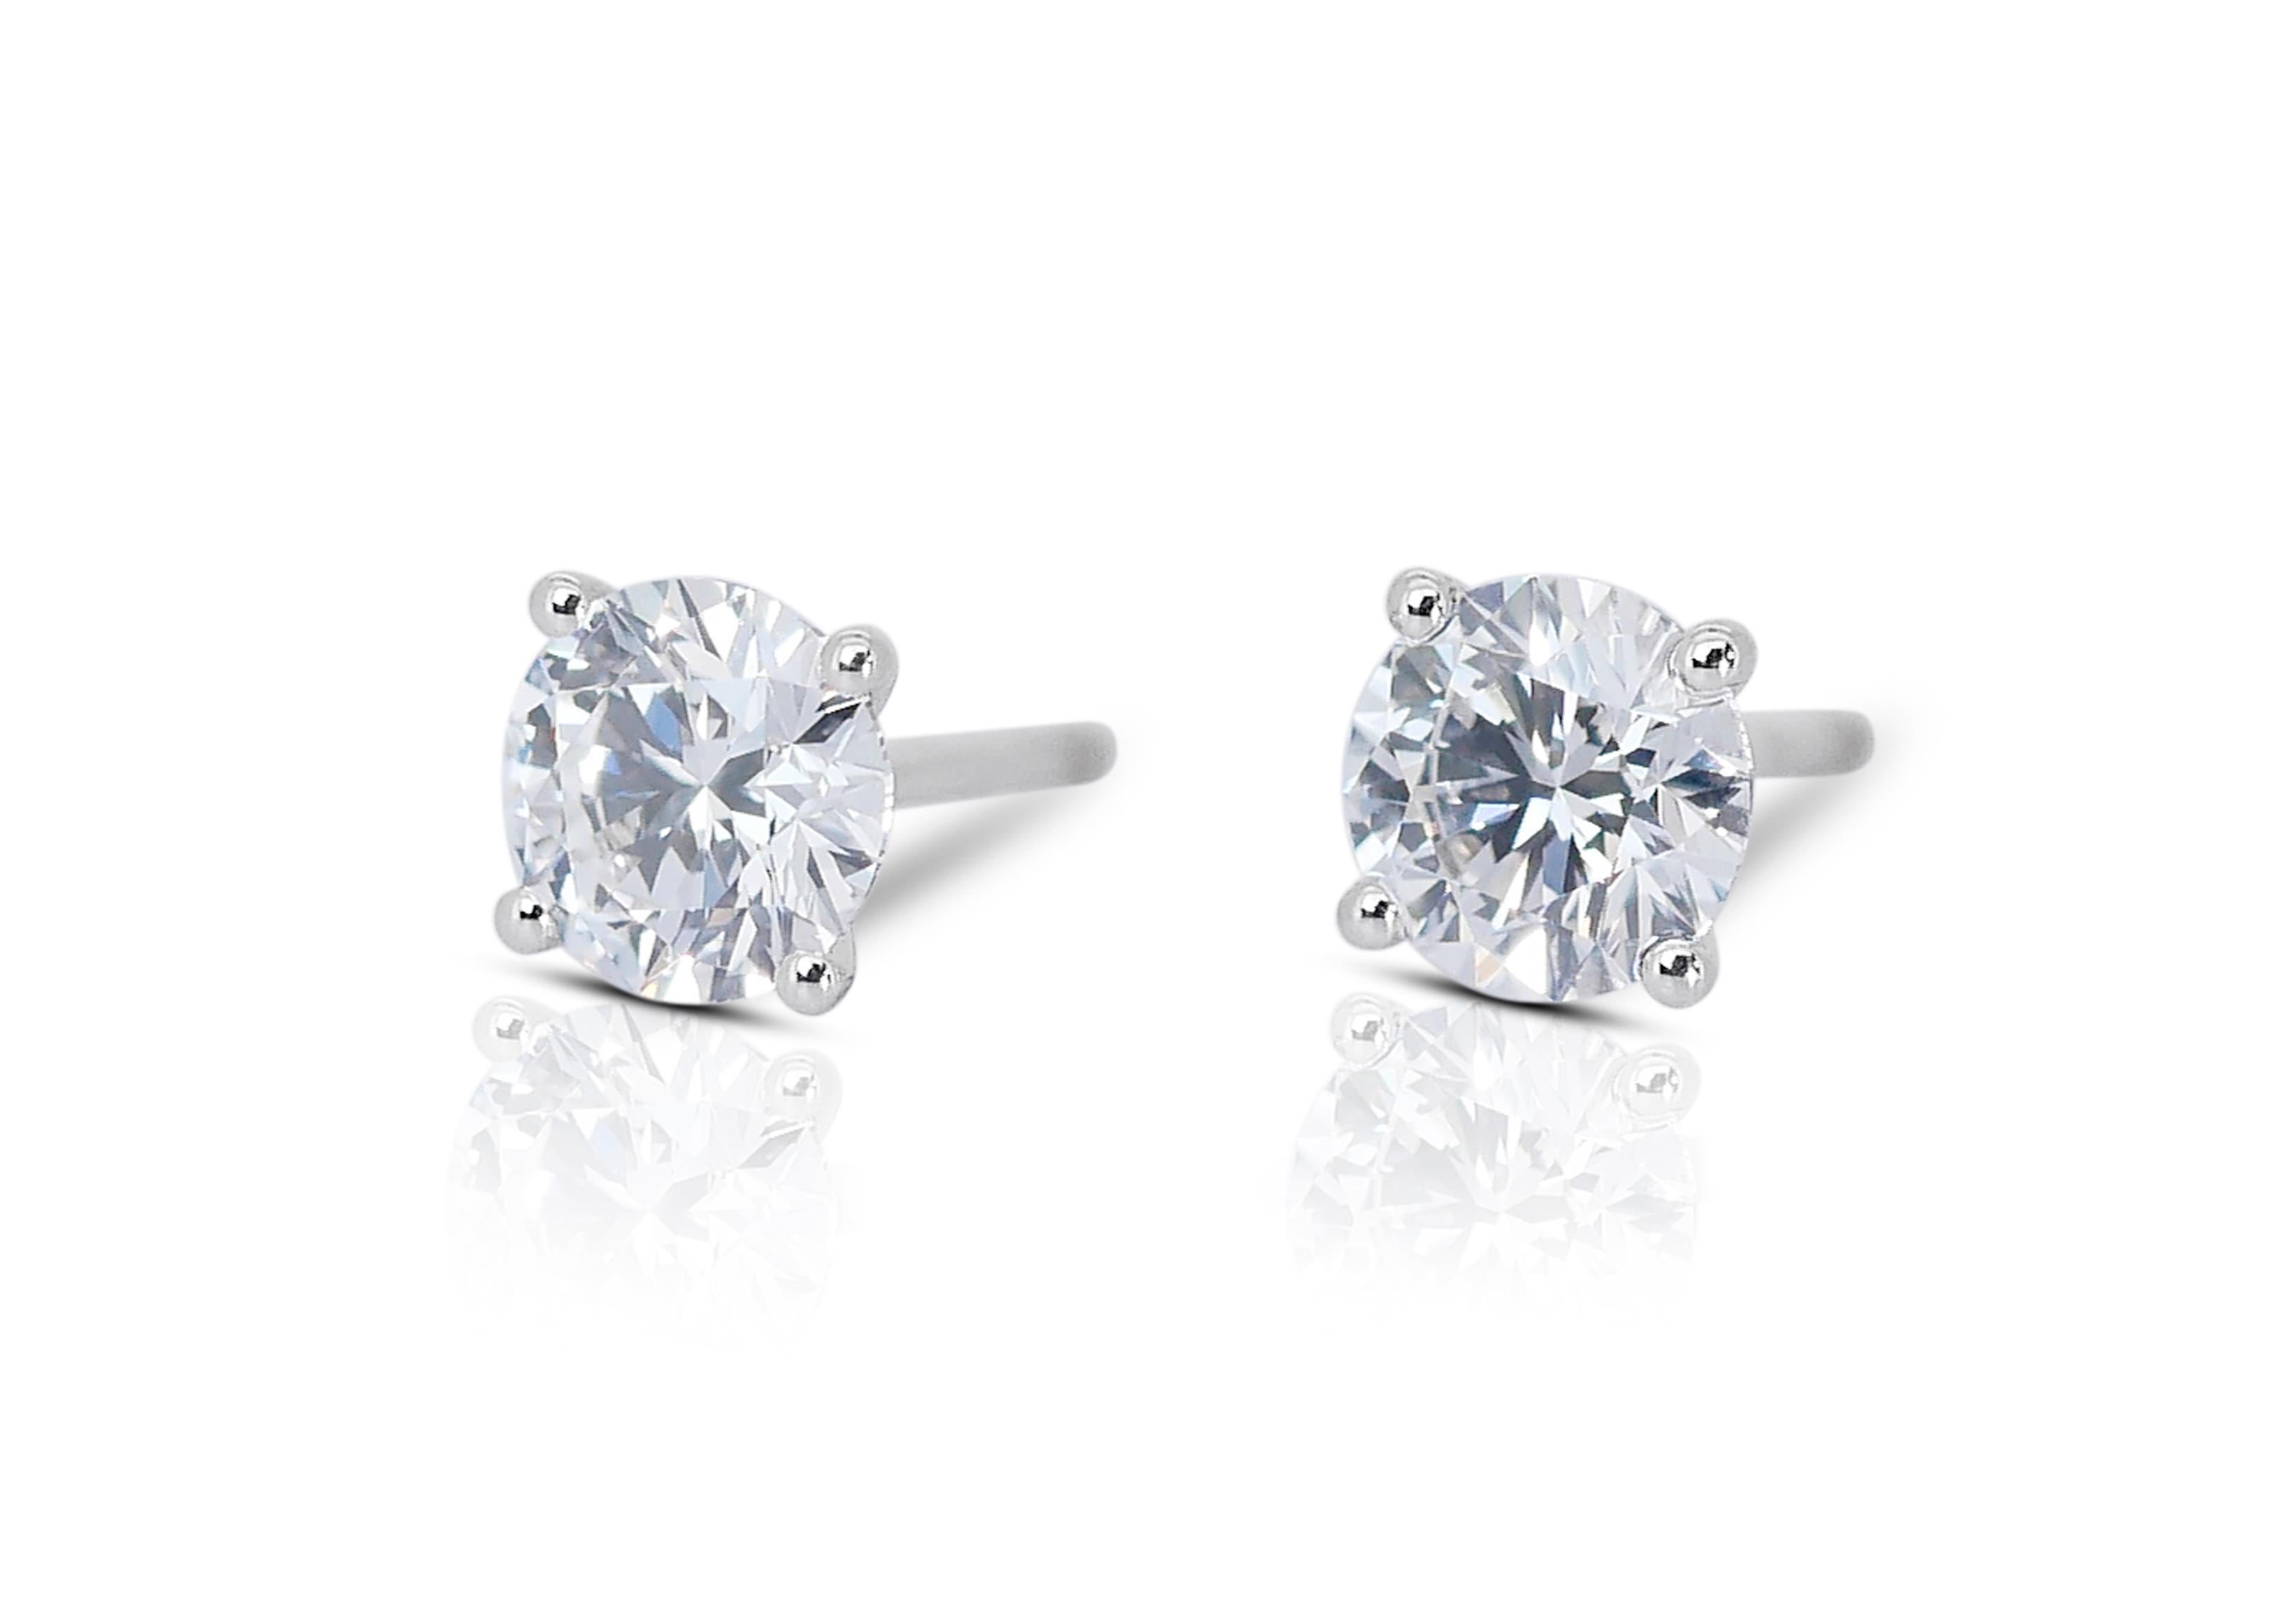 Women's Spectacular 2.06ct Diamond Stud Earrings in 18k White Gold - GIA Certified For Sale